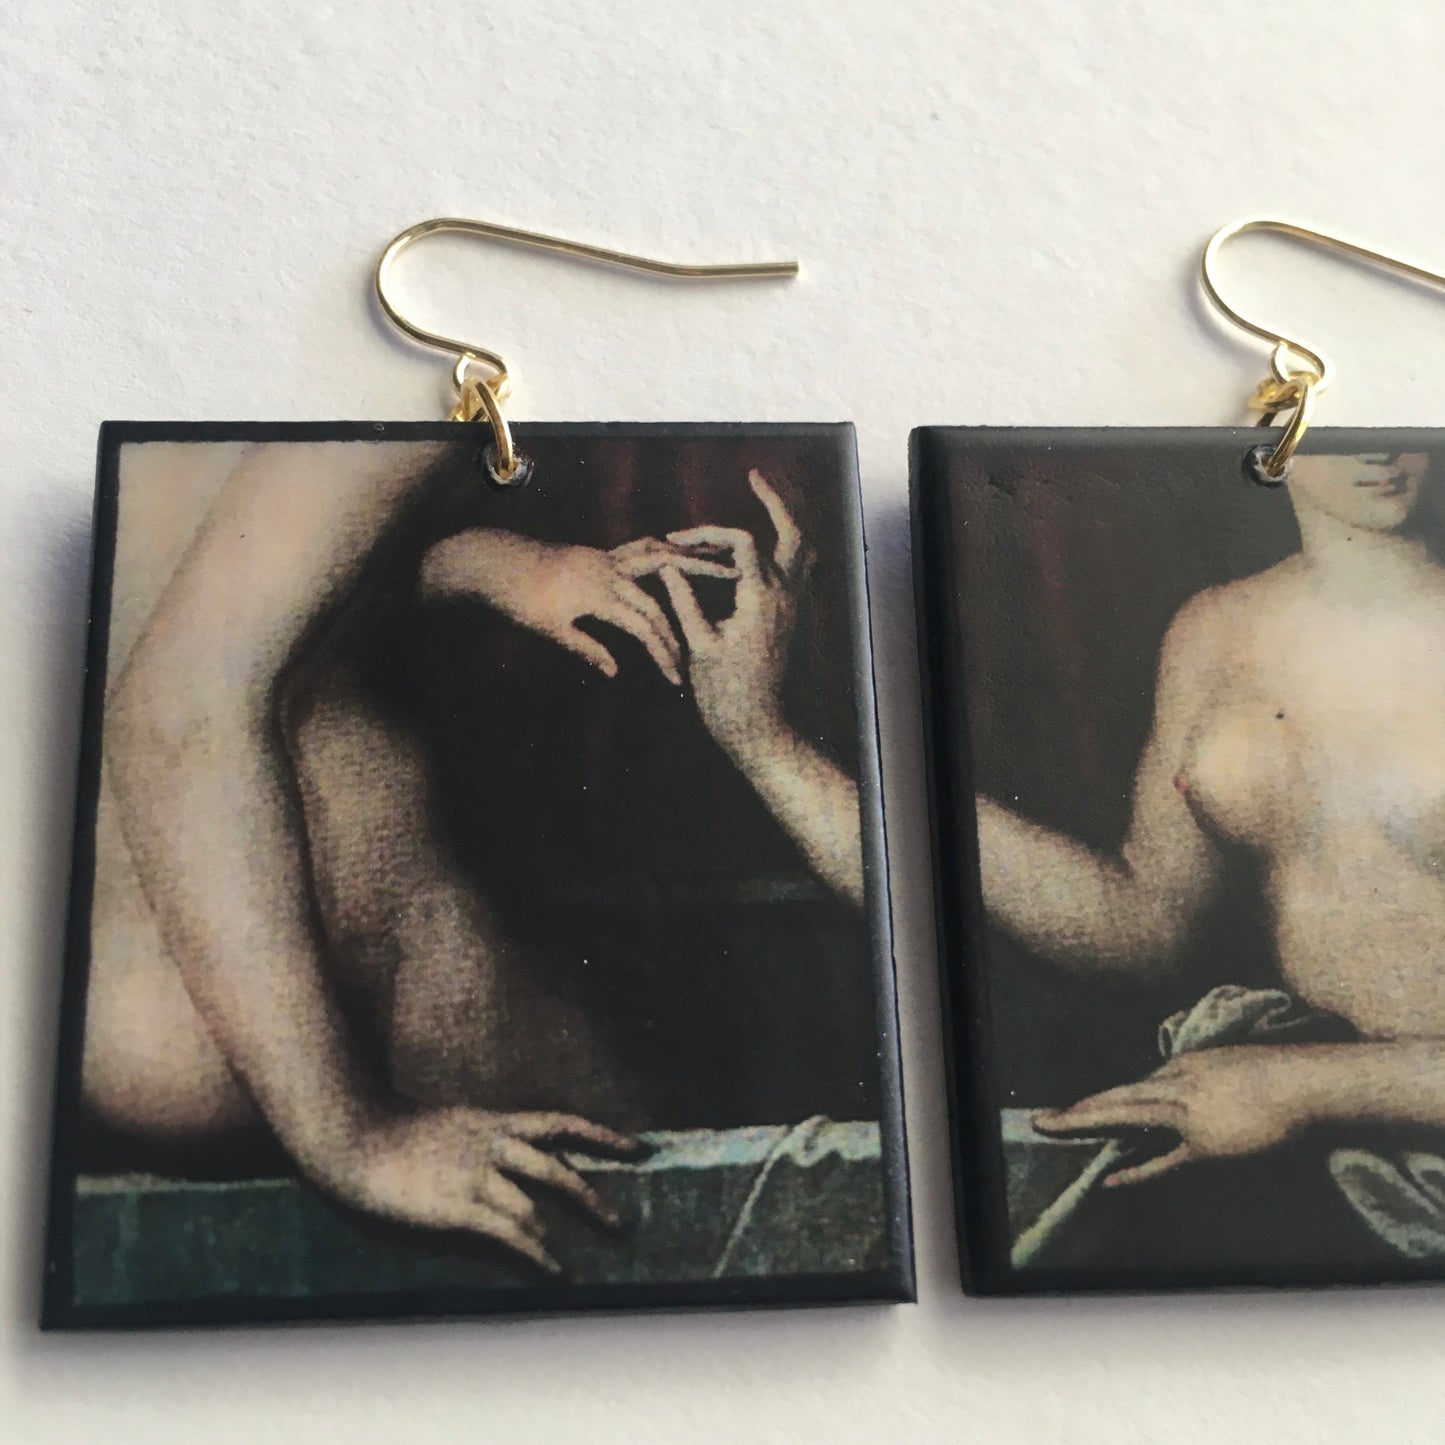 Sensual art detail earrings handmade from sustainable wood by Obljewellery. The detail comes from a painting by Ecole de Fontainebleau, two necked women engagement ring moment.